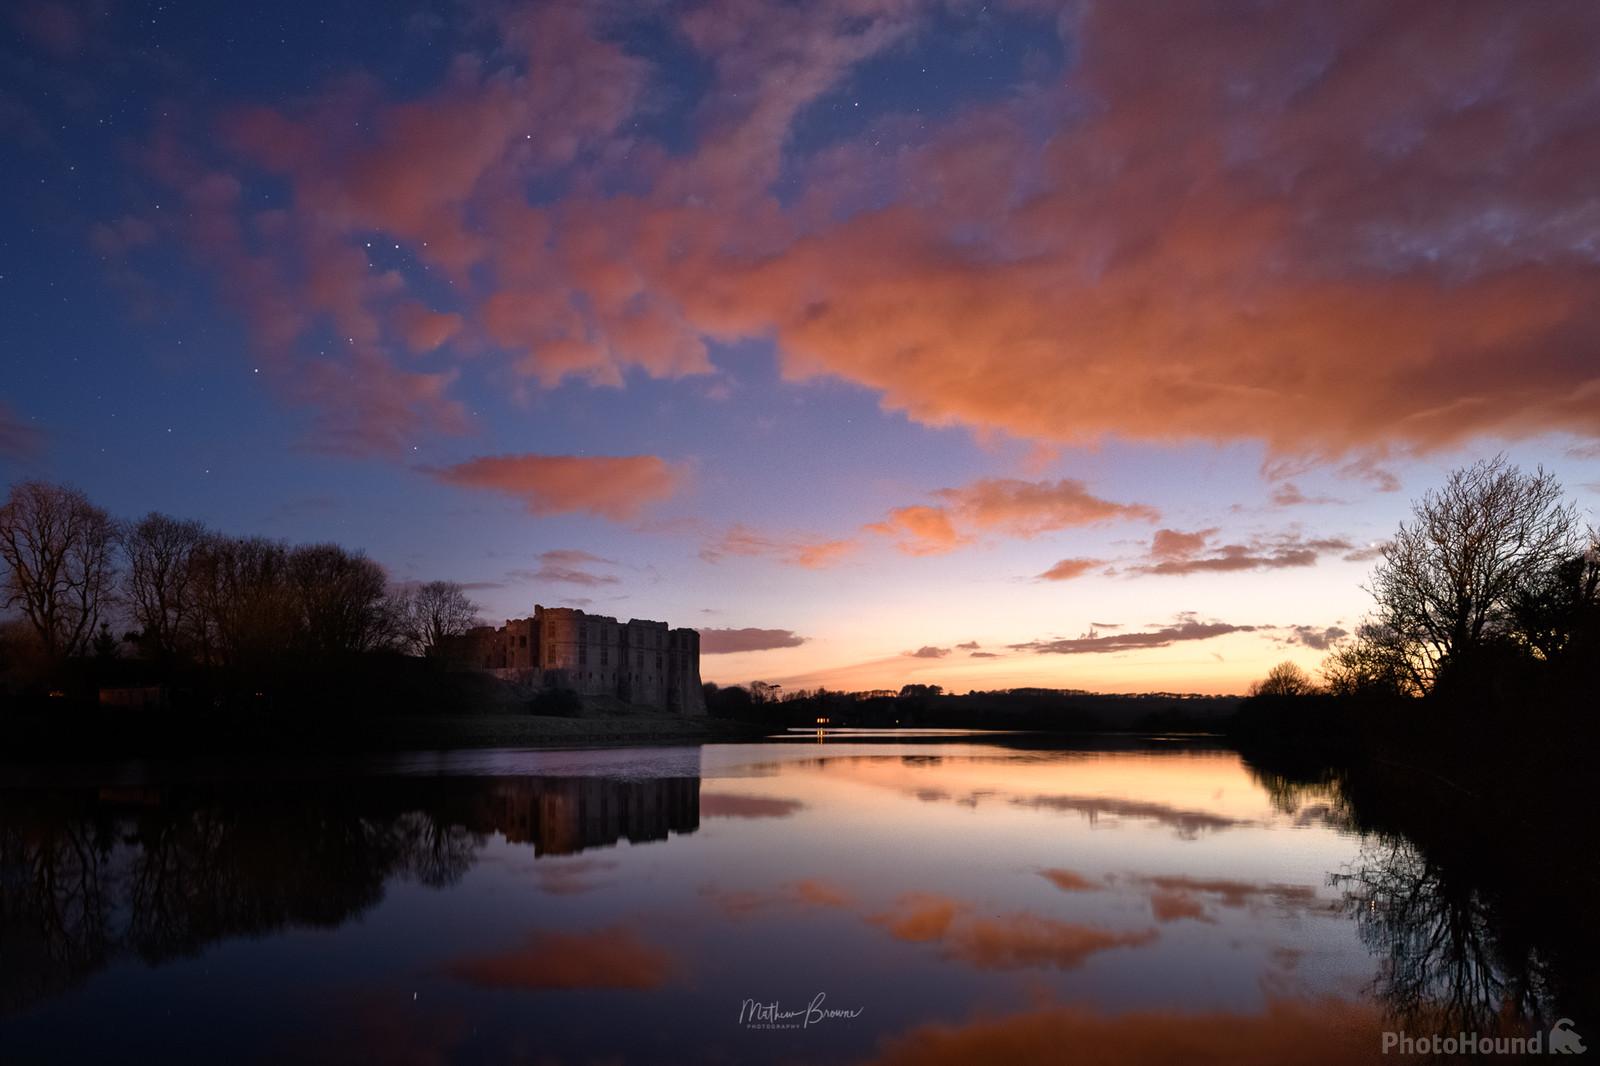 Image of Carew Castle & River by Mathew Browne